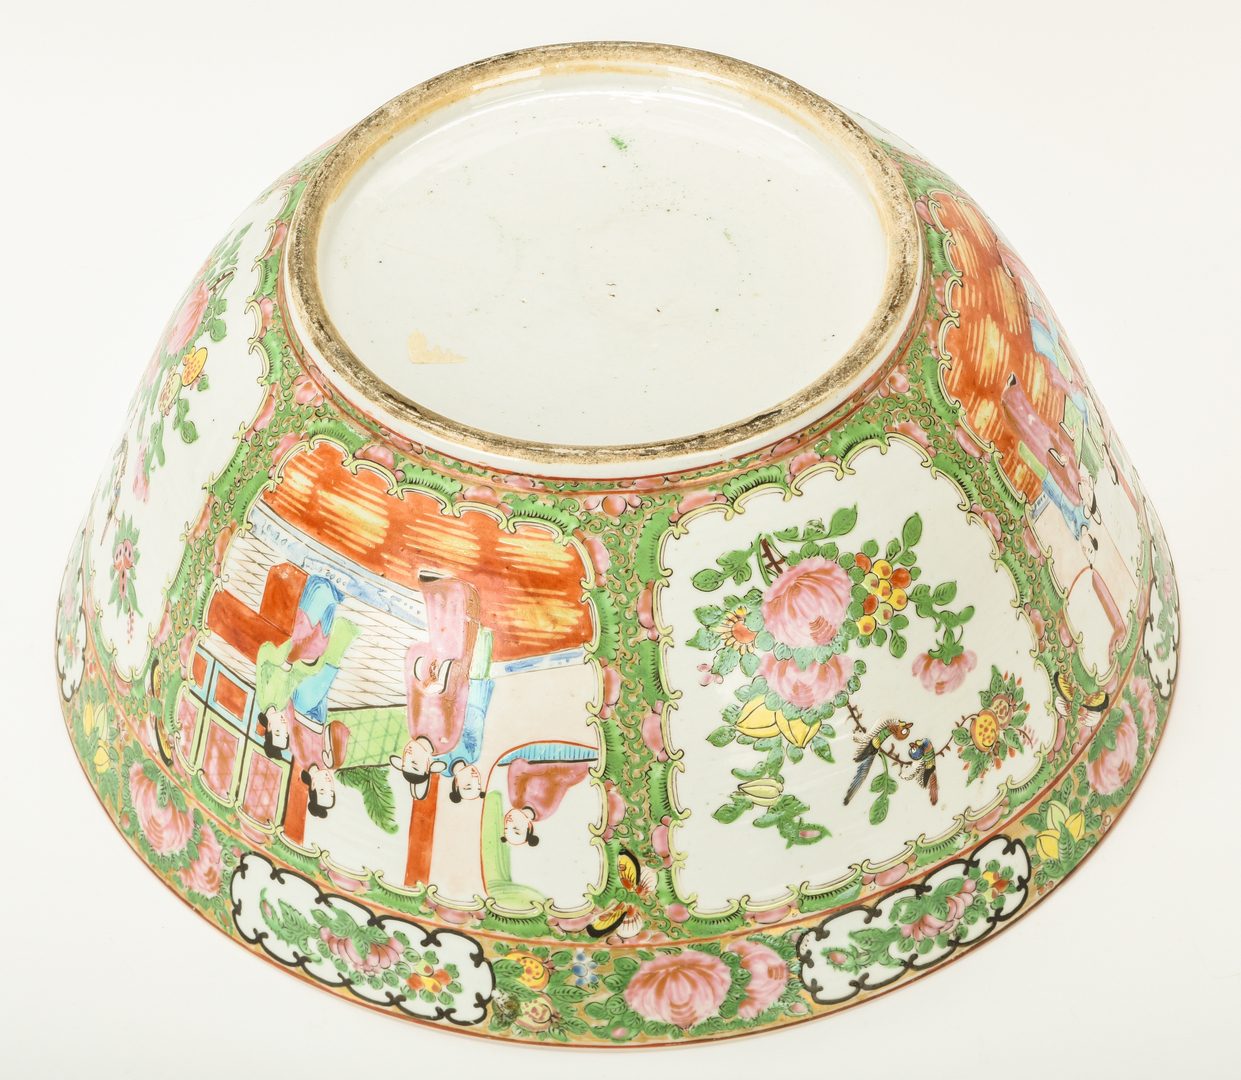 Lot 353: Chinese Export Rose Medallion Punch Bowl